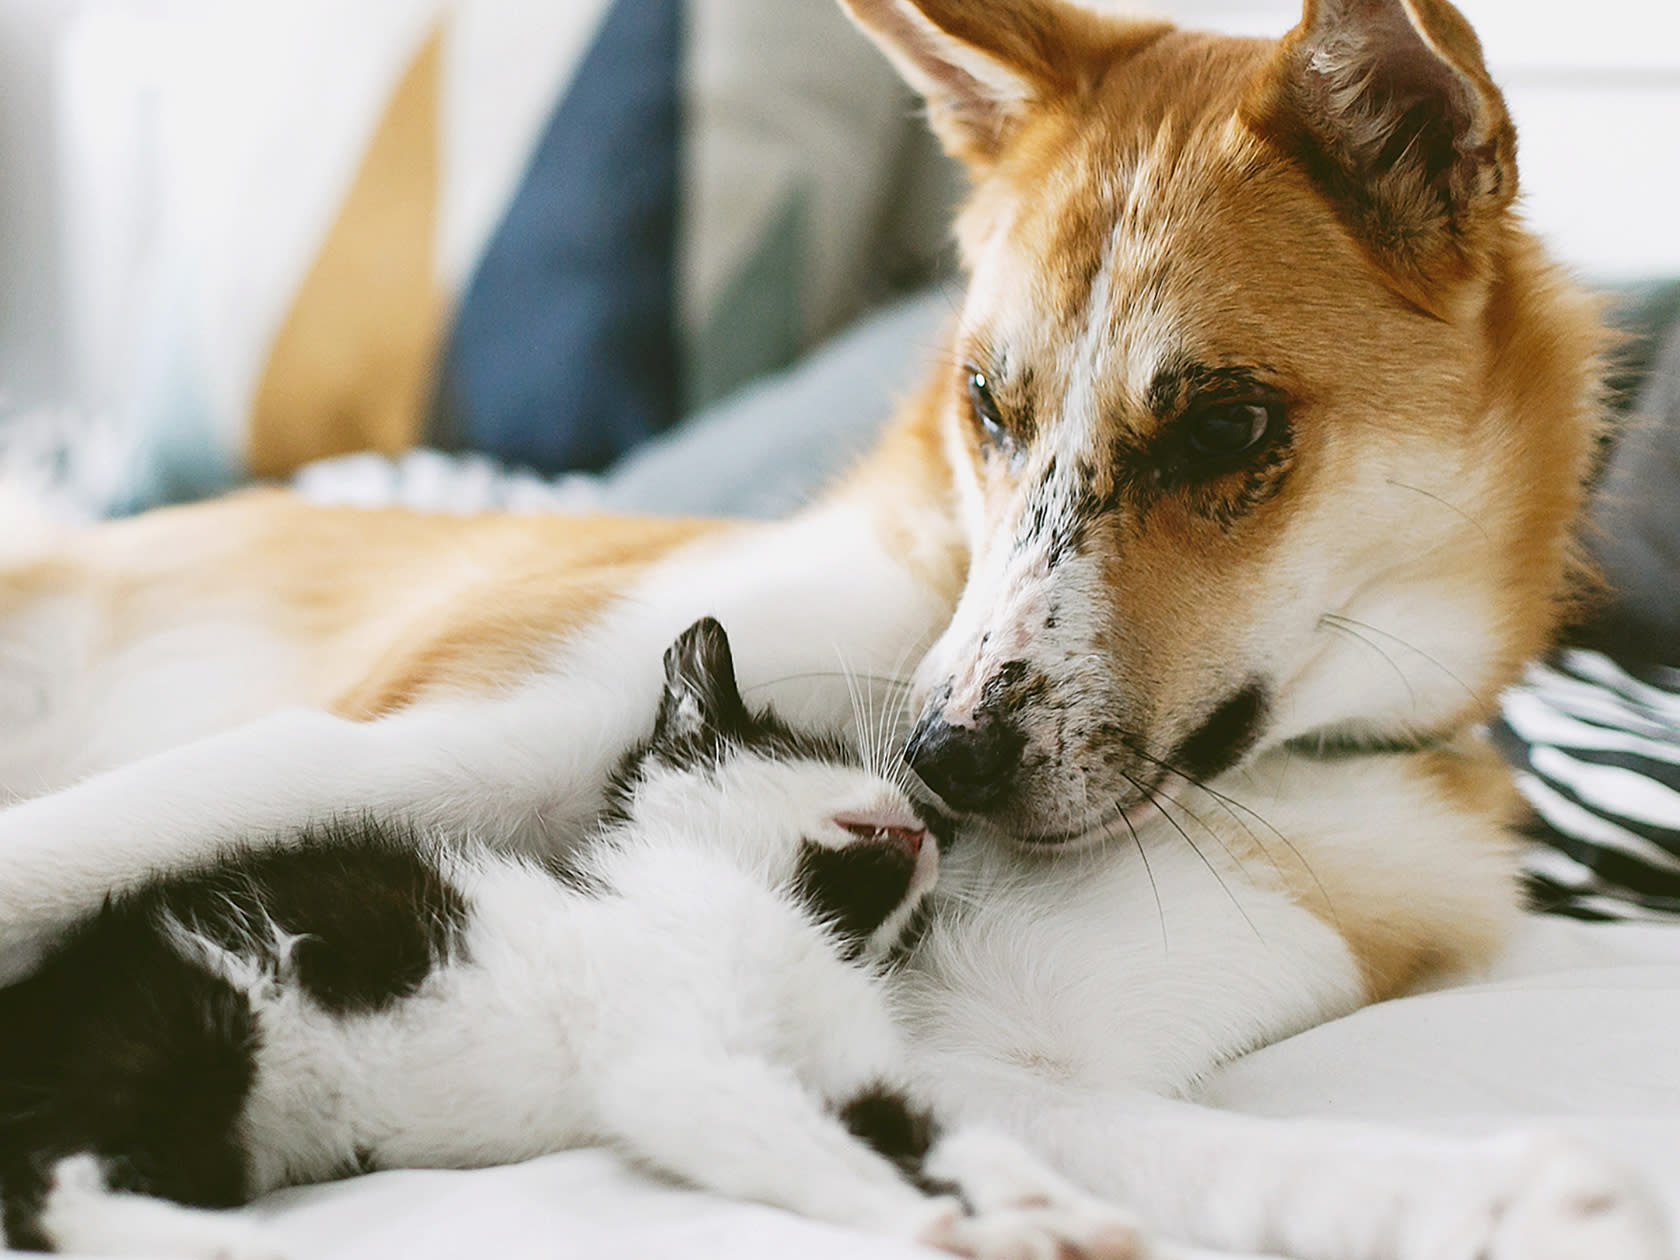 dog and cat snuggling together